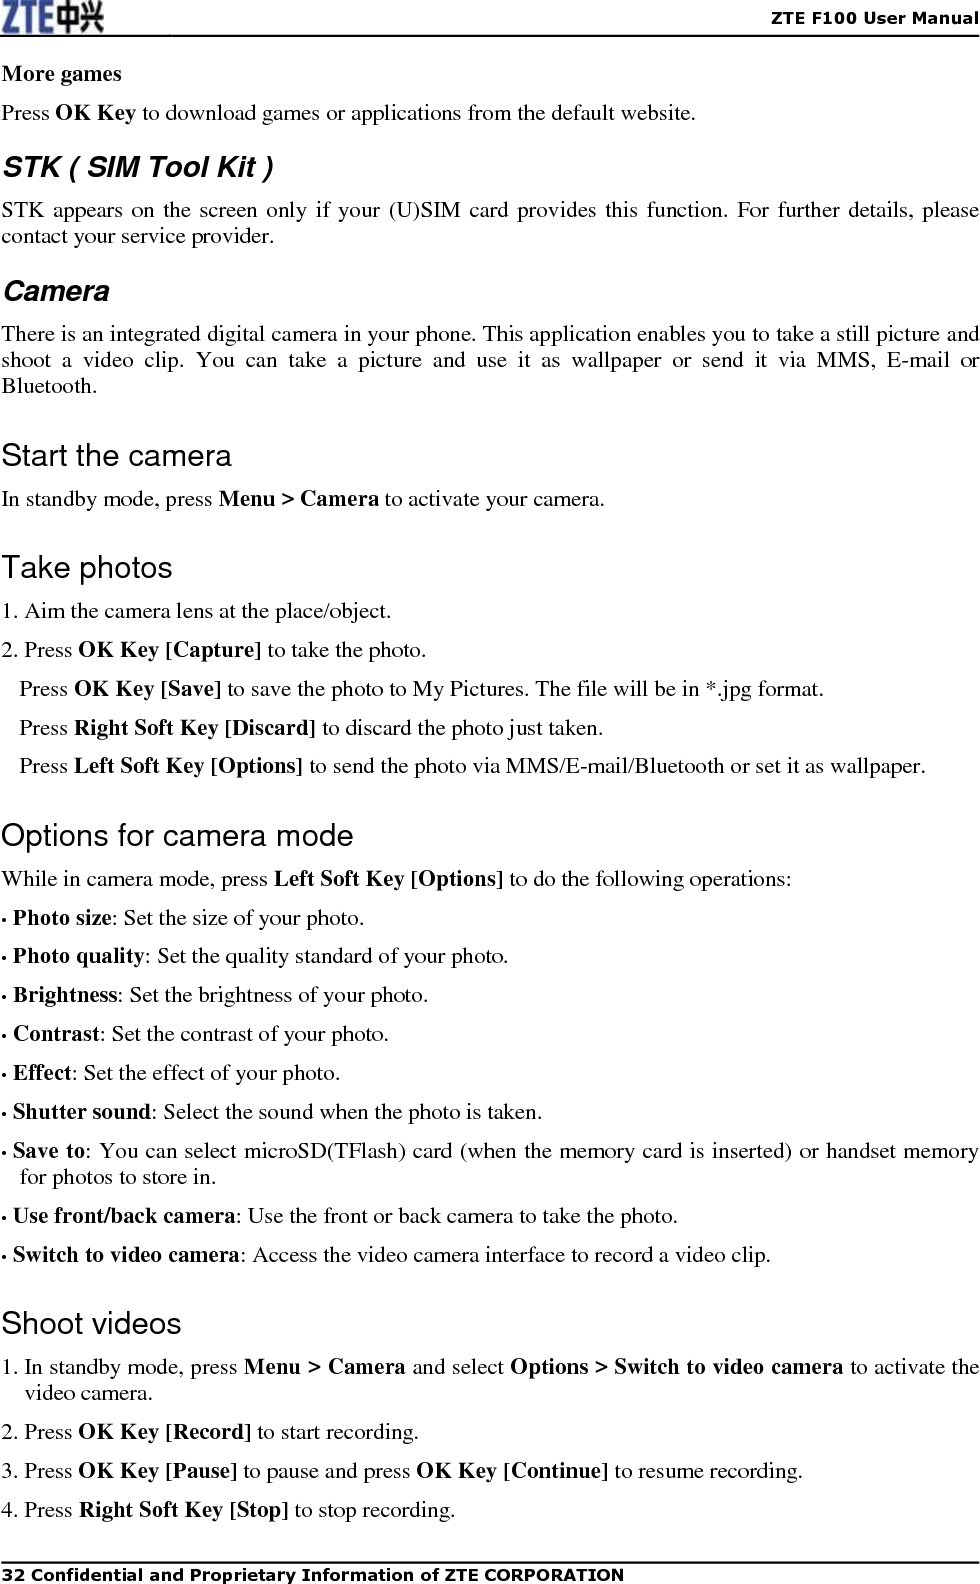    ZTE F100 User Manual   32 Confidential and Proprietary Information of ZTE CORPORATION More games Press OK Key to download games or applications from the default website. STK ( SIM Tool Kit ) STK appears on the screen only if your (U)SIM card provides this function. For further details, please contact your service provider. Camera There is an integrated digital camera in your phone. This application enables you to take a still picture and shoot  a  video  clip.  You  can  take  a  picture  and  use  it  as  wallpaper  or  send  it  via  MMS,  E-mail  or Bluetooth. Start the camera In standby mode, press Menu &gt; Camera to activate your camera. Take photos 1. Aim the camera lens at the place/object. 2. Press OK Key [Capture] to take the photo. Press OK Key [Save] to save the photo to My Pictures. The file will be in *.jpg format. Press Right Soft Key [Discard] to discard the photo just taken. Press Left Soft Key [Options] to send the photo via MMS/E-mail/Bluetooth or set it as wallpaper. Options for camera mode While in camera mode, press Left Soft Key [Options] to do the following operations:   • Photo size: Set the size of your photo. • Photo quality: Set the quality standard of your photo. • Brightness: Set the brightness of your photo. • Contrast: Set the contrast of your photo.   • Effect: Set the effect of your photo. • Shutter sound: Select the sound when the photo is taken. • Save to: You can select microSD(TFlash) card (when the memory card is inserted) or handset memory for photos to store in. • Use front/back camera: Use the front or back camera to take the photo. • Switch to video camera: Access the video camera interface to record a video clip. Shoot videos 1. In standby mode, press Menu &gt; Camera and select Options &gt; Switch to video camera to activate the video camera. 2. Press OK Key [Record] to start recording. 3. Press OK Key [Pause] to pause and press OK Key [Continue] to resume recording. 4. Press Right Soft Key [Stop] to stop recording. 